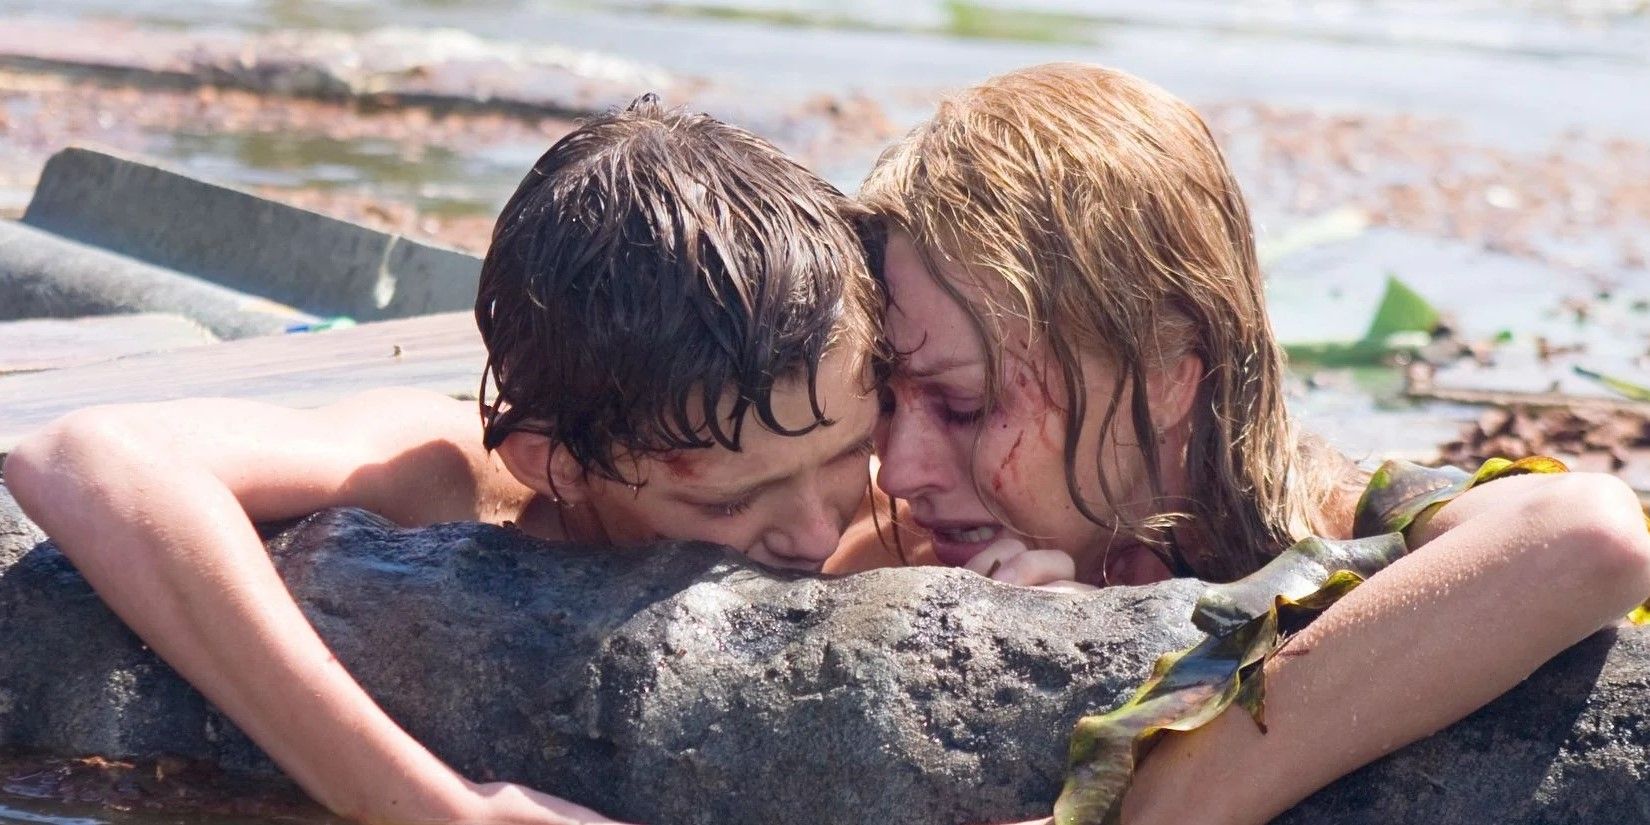 Tom Holland and Naomi Watts as Lucas and Maria Bennett in The Impossible